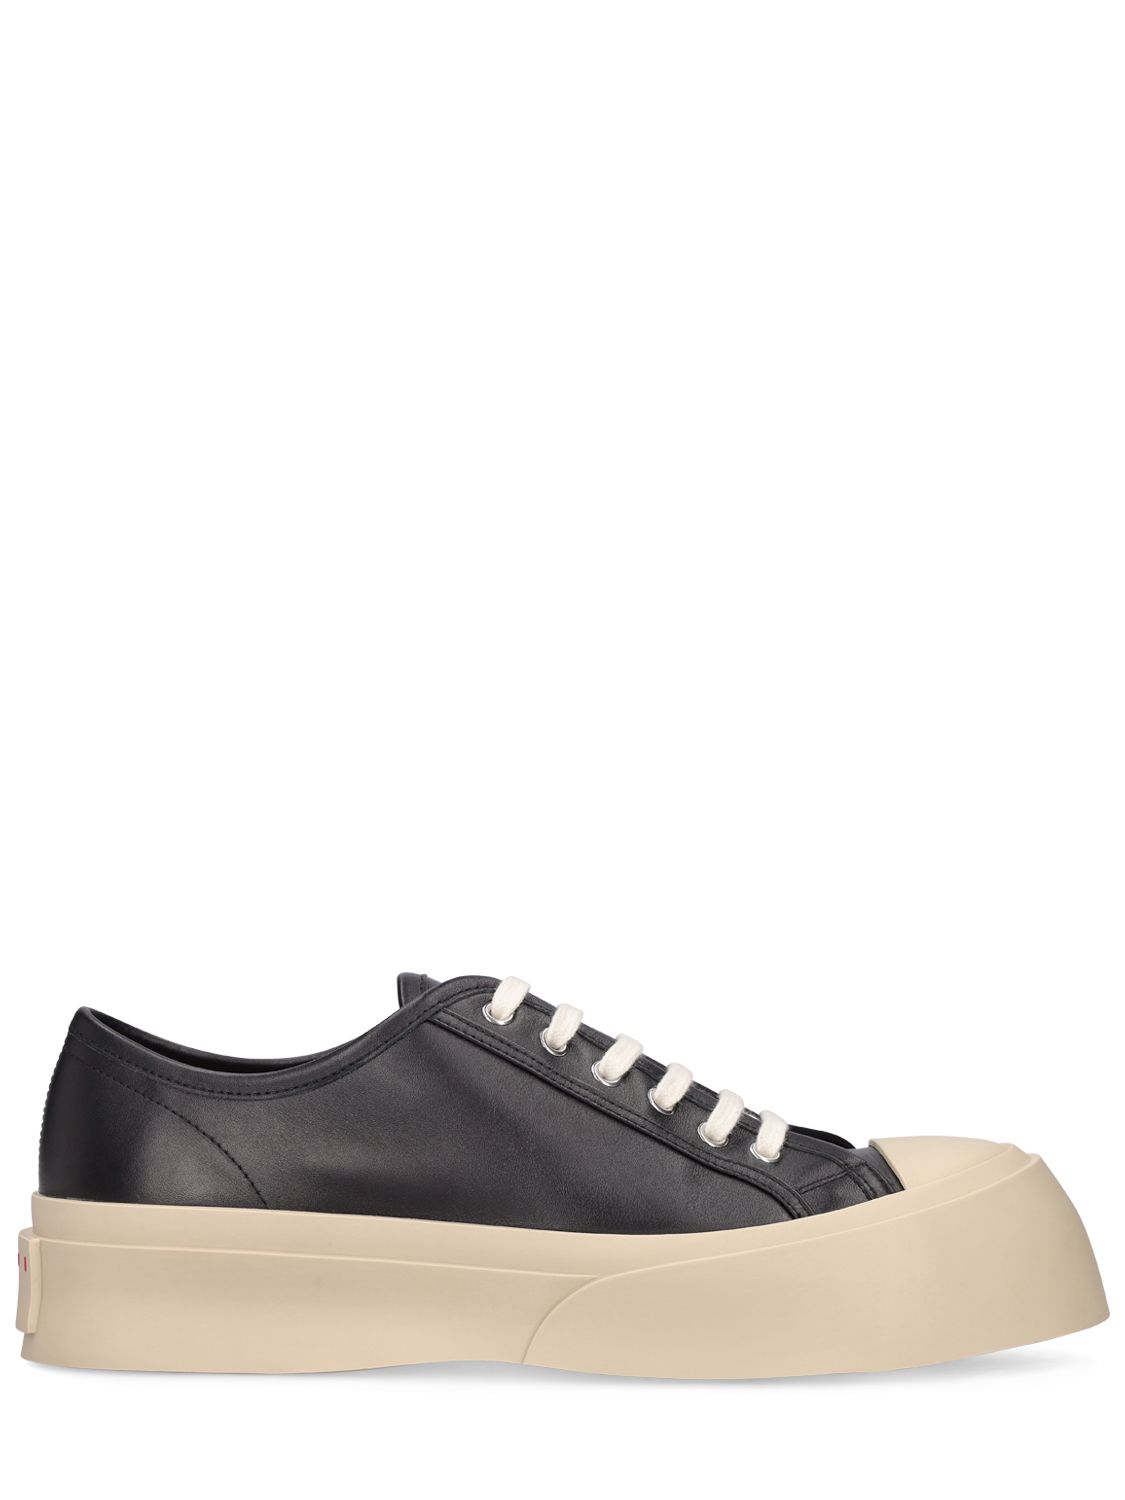 Marni Pablo Leather Low Top Trainers In Black